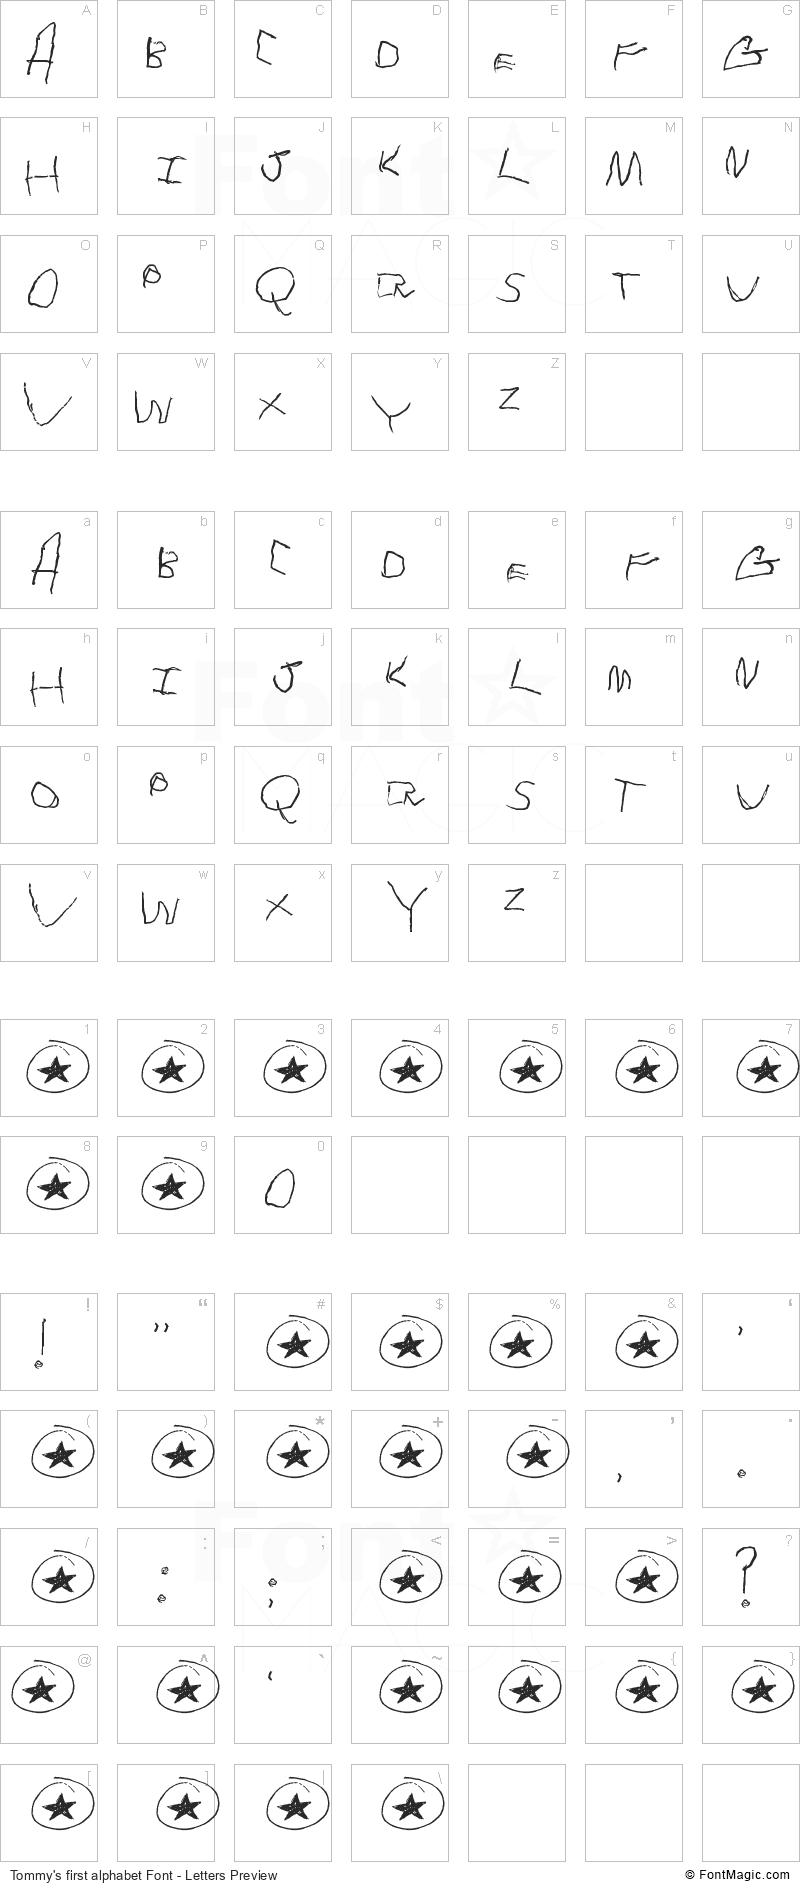 Tommy’s first alphabet Font - All Latters Preview Chart